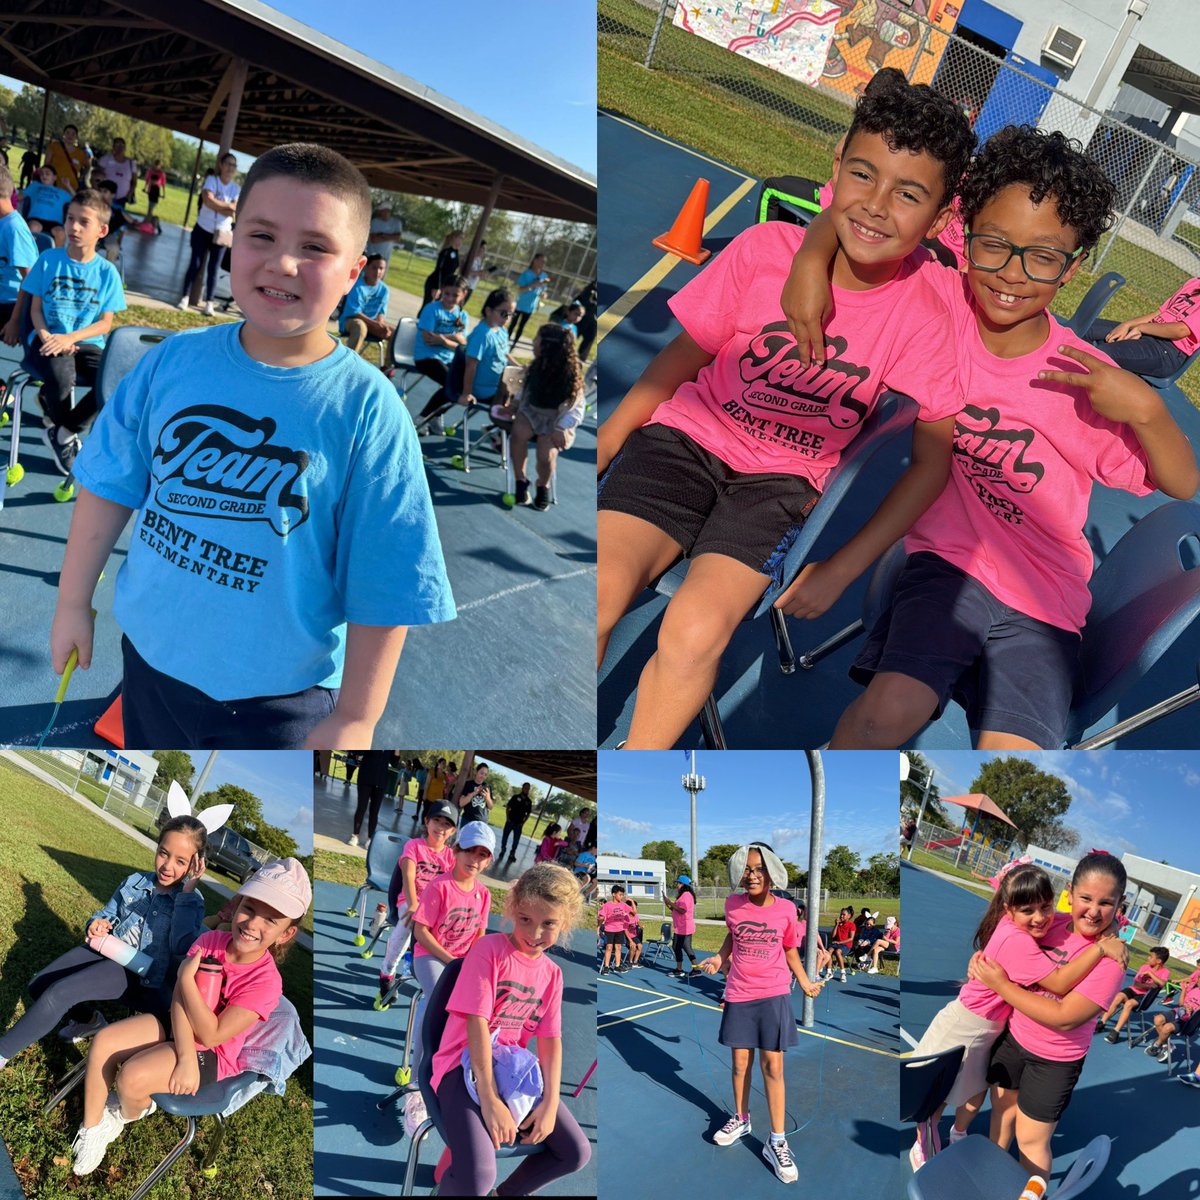 Big thanks to Mr. Farrah for making our #JumpRopeForFun event a huge success! ❤️ #BTEFalconsFlyHigh 🦅🚀 #YourBestChoiceMDCPS @SuptDotres @MDCPSSouth @MonicaColucciD8